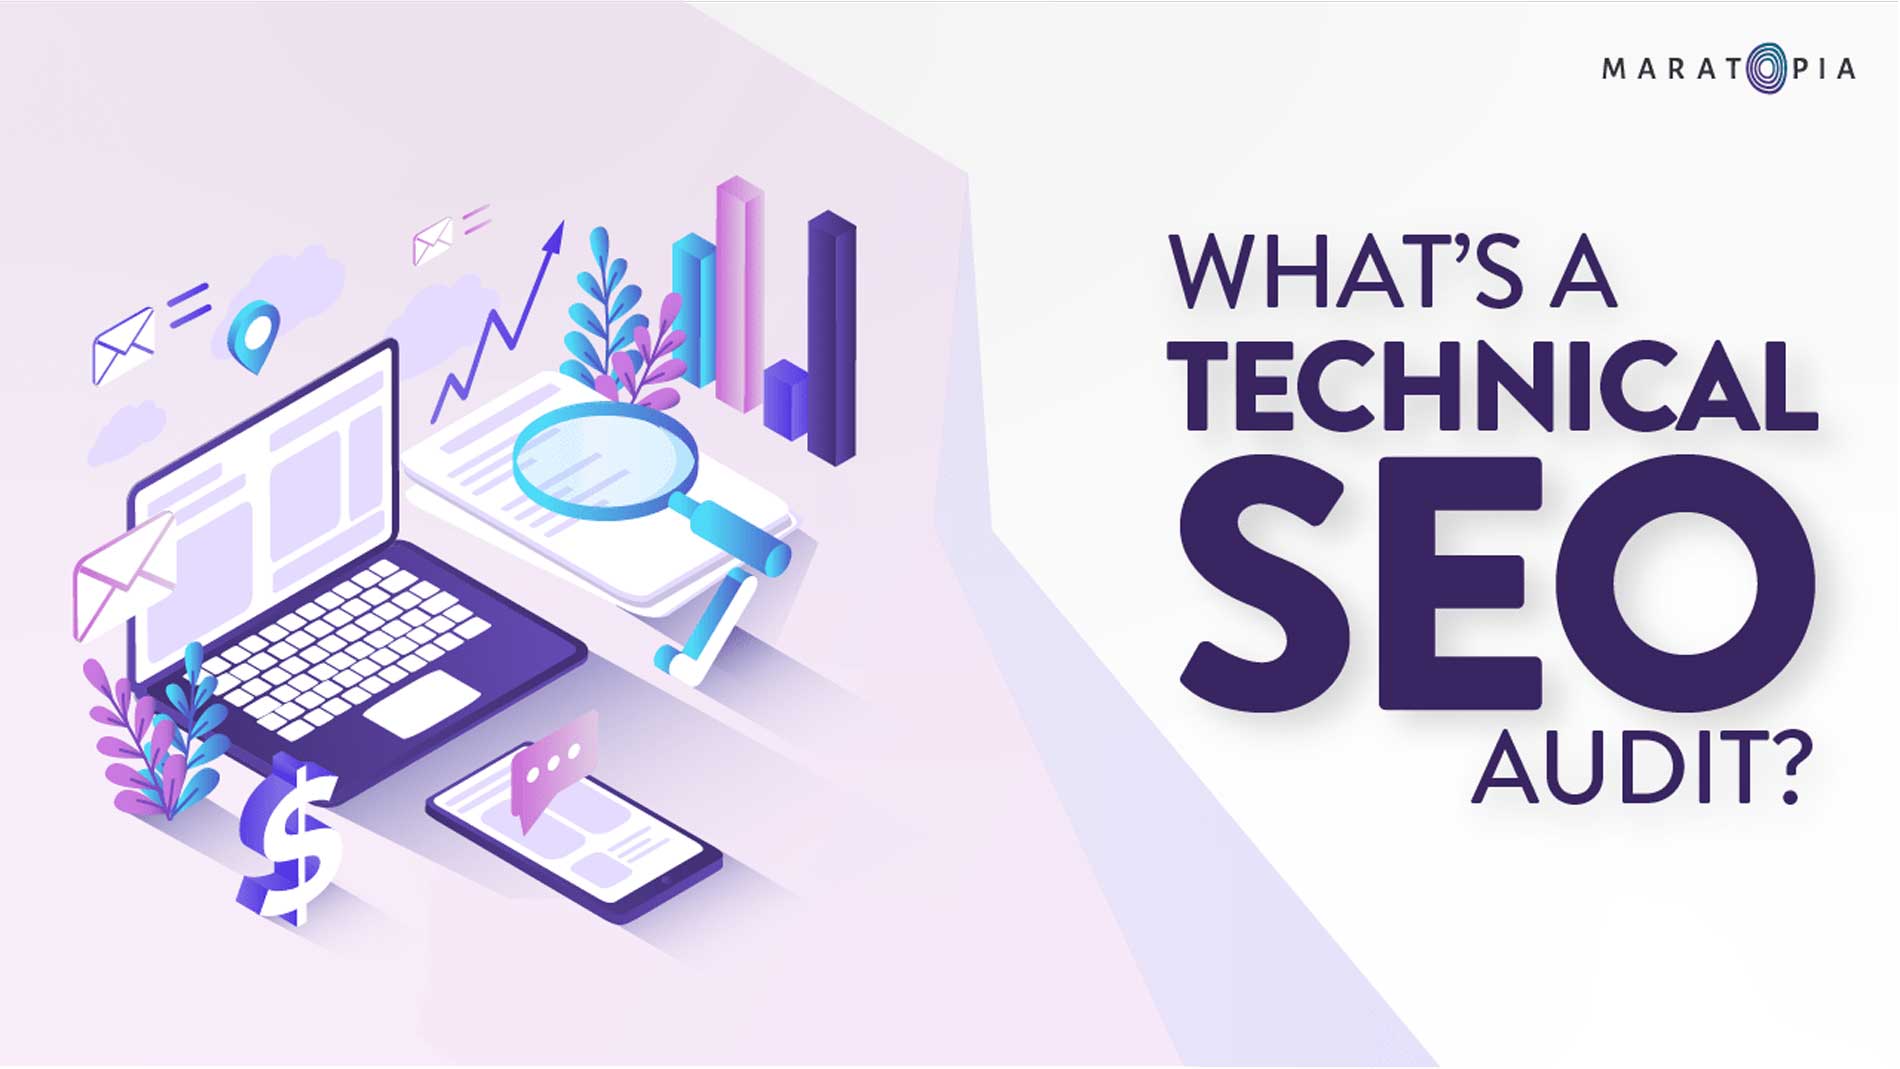 What’s A Technical SEO Audit?